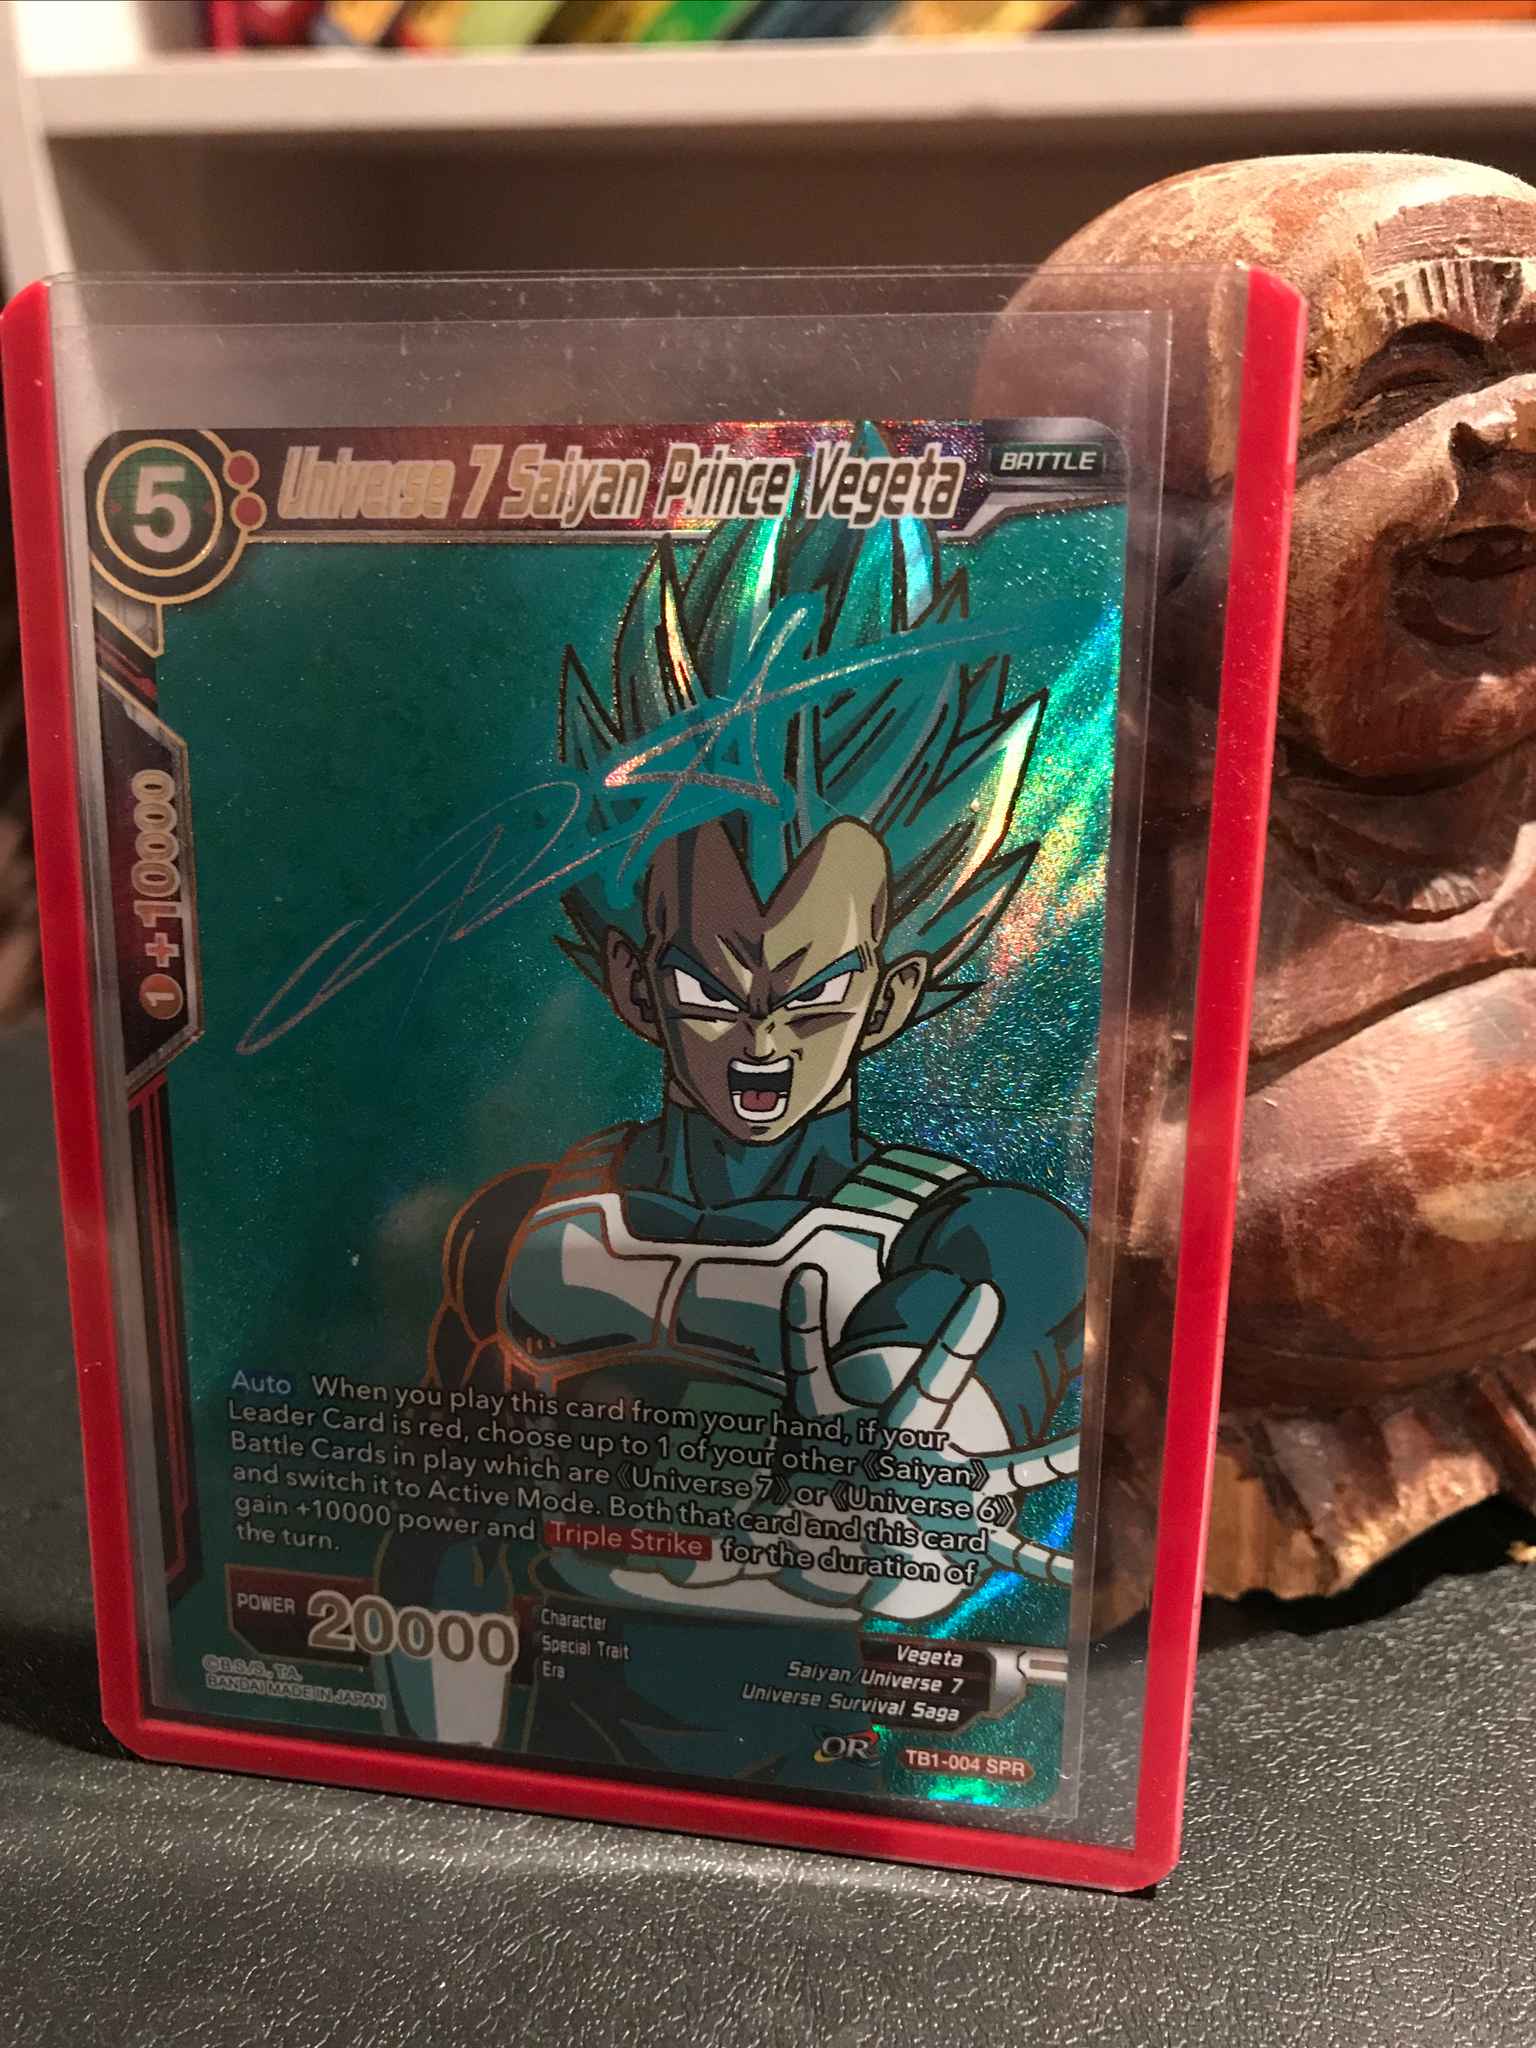 Fresh Pull Universe 7 Saiyan Prince Vegeta Spr Universe 7 Saiyan Prince Vegeta Spr Tournament Of Power Dragon Ball Super Ccg Online Gaming Store For Cards Miniatures Singles Packs Booster Boxes